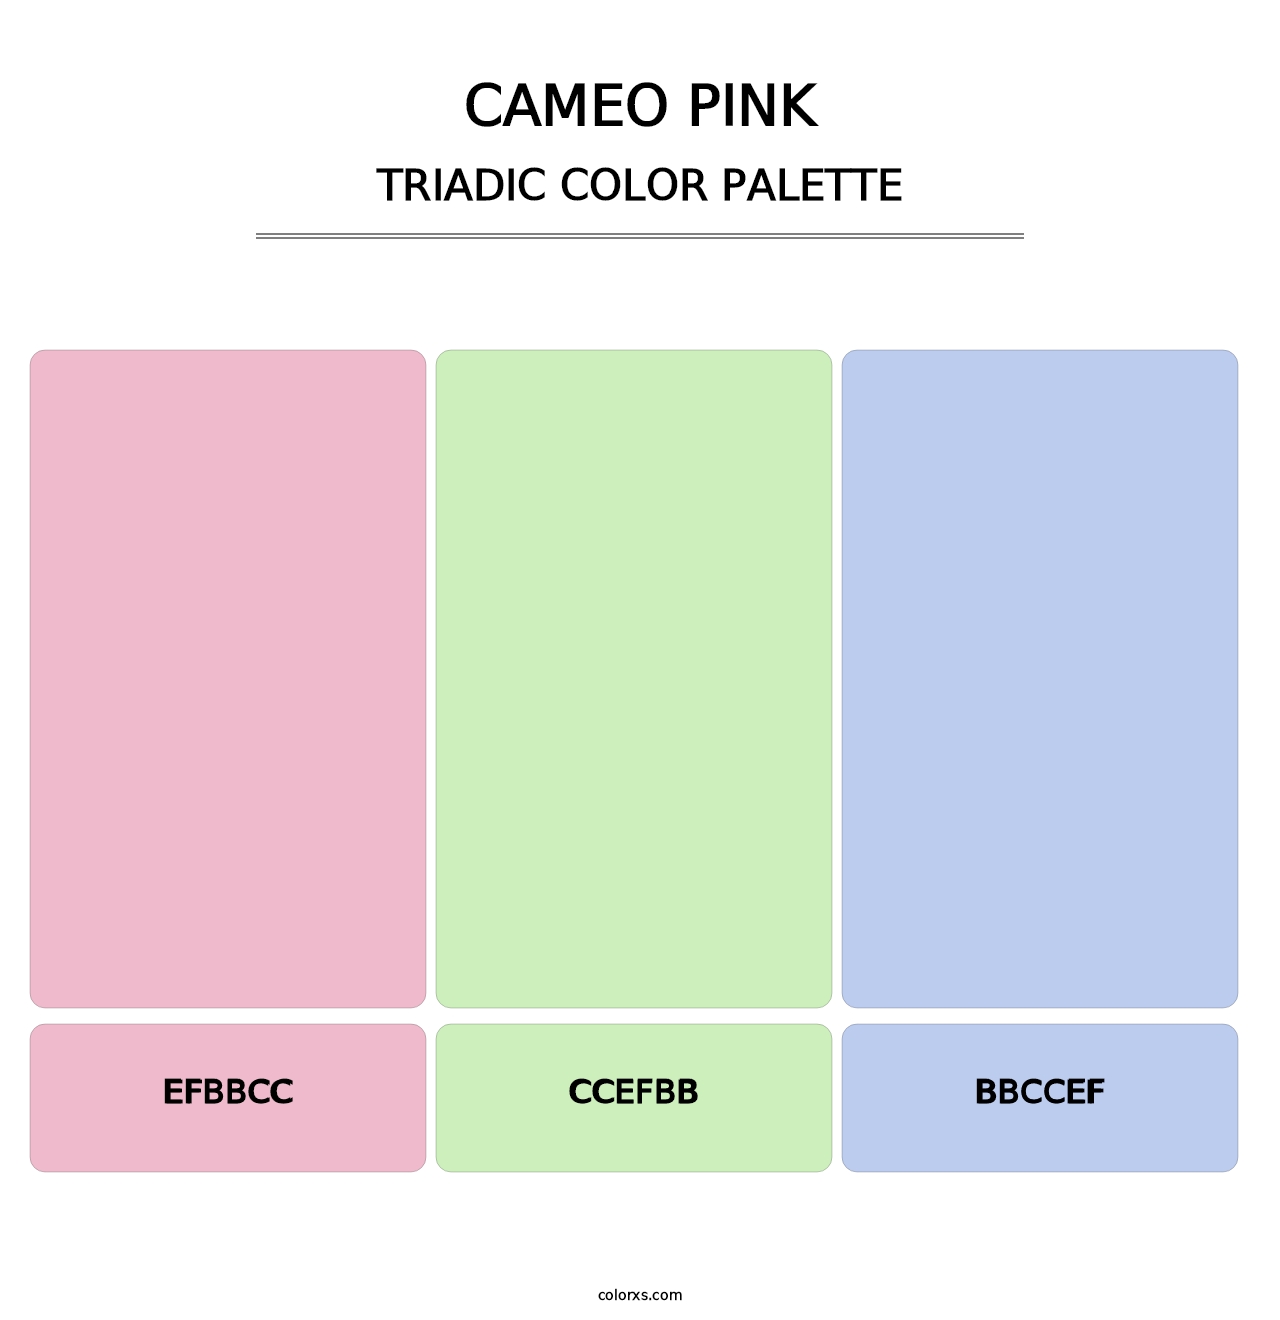 Cameo Pink - Triadic Color Palette